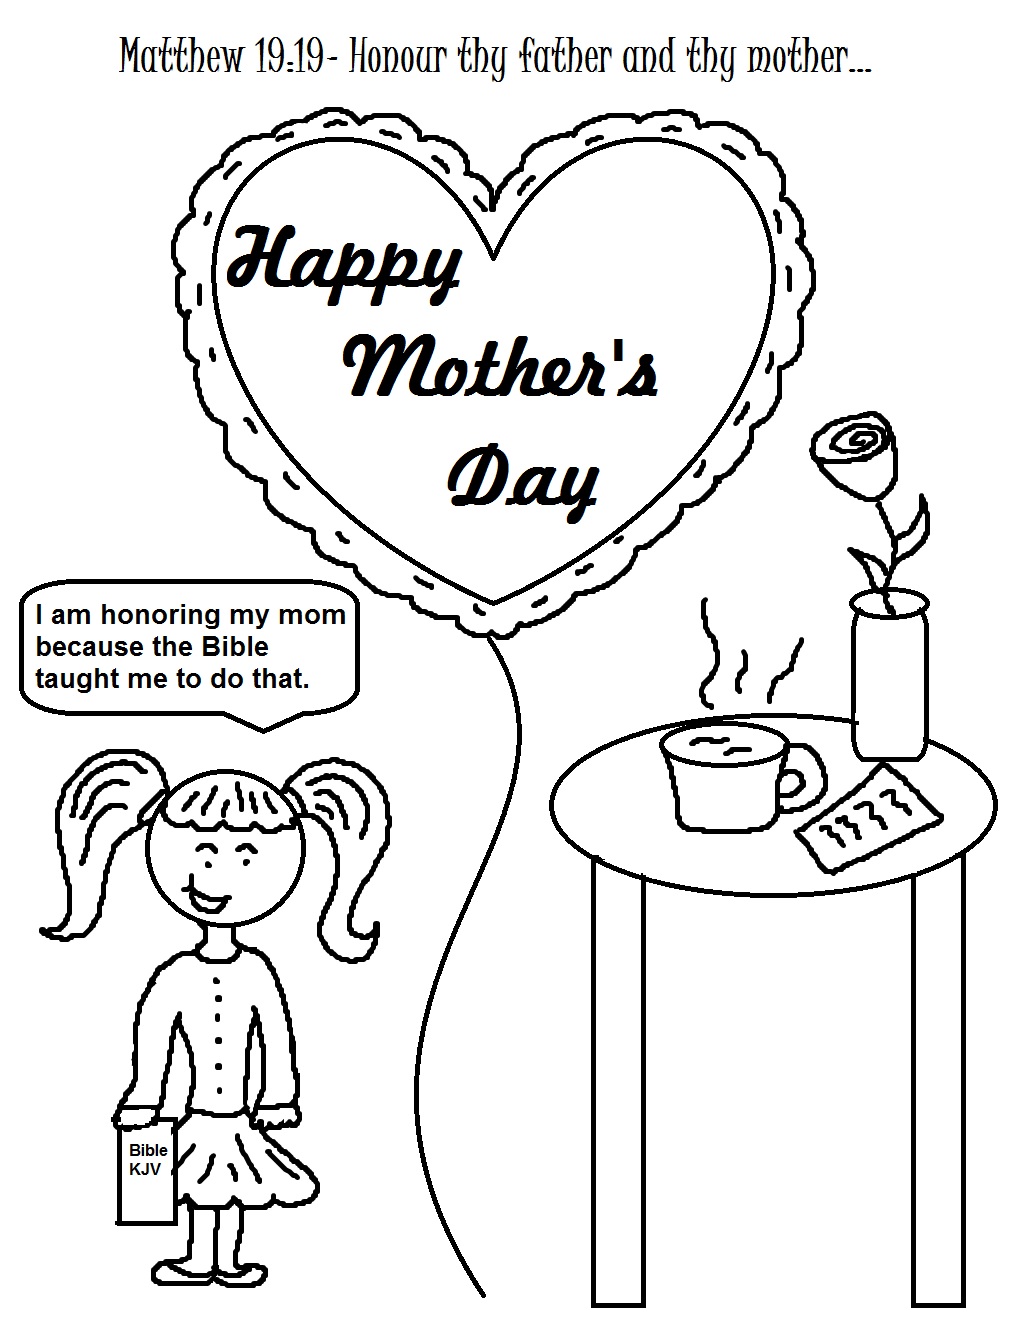 Happy Mothers Day Coloring Pages Coloring Picutres